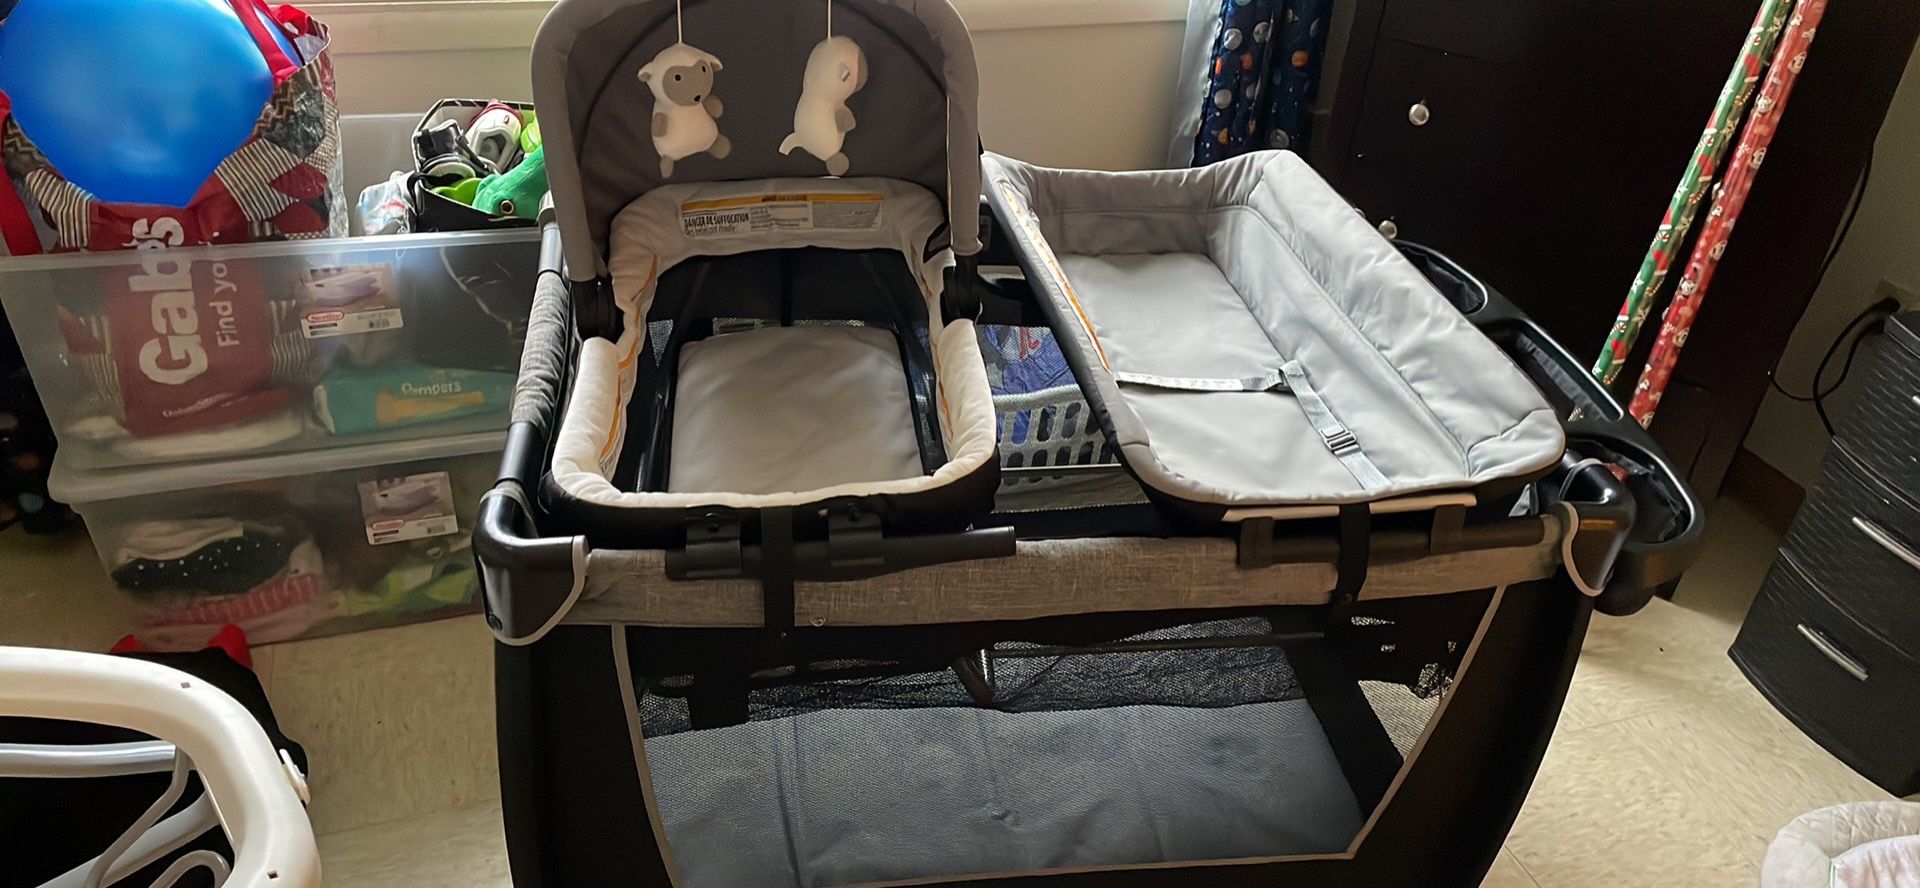 Pack and play/bassinet/changing table